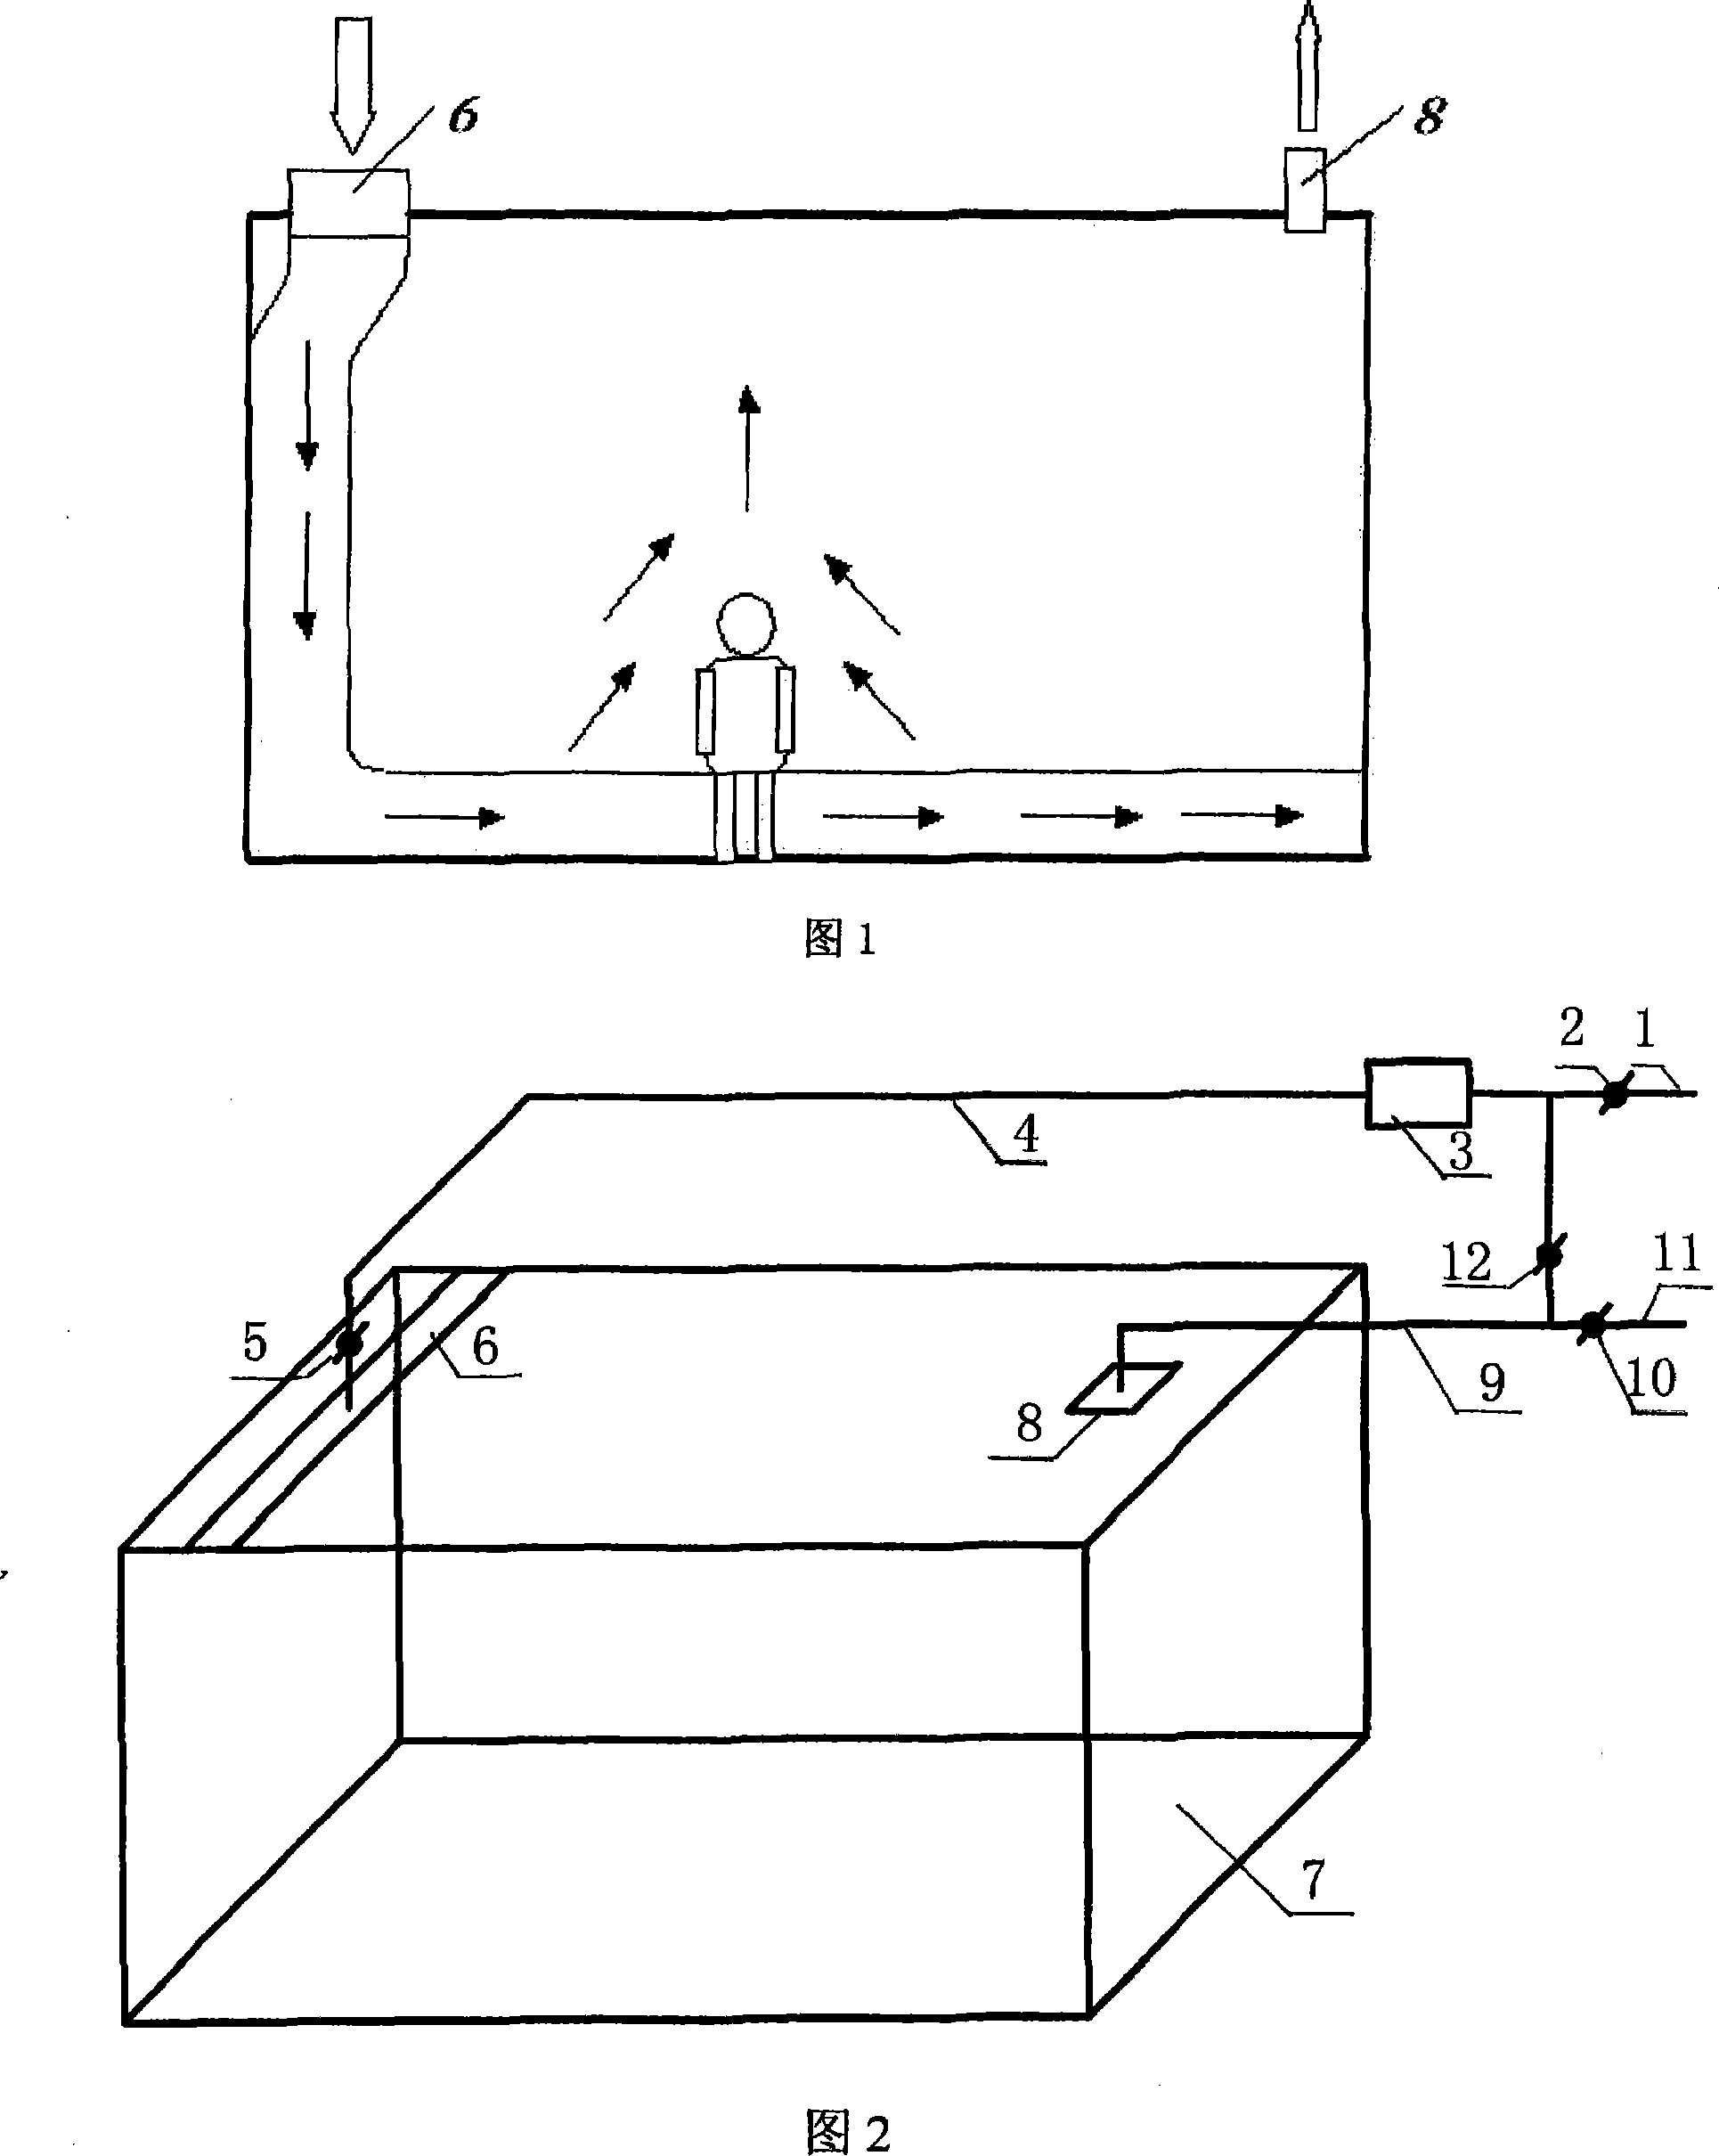 Ventilating system of vertical wall attaching jet air lake mode